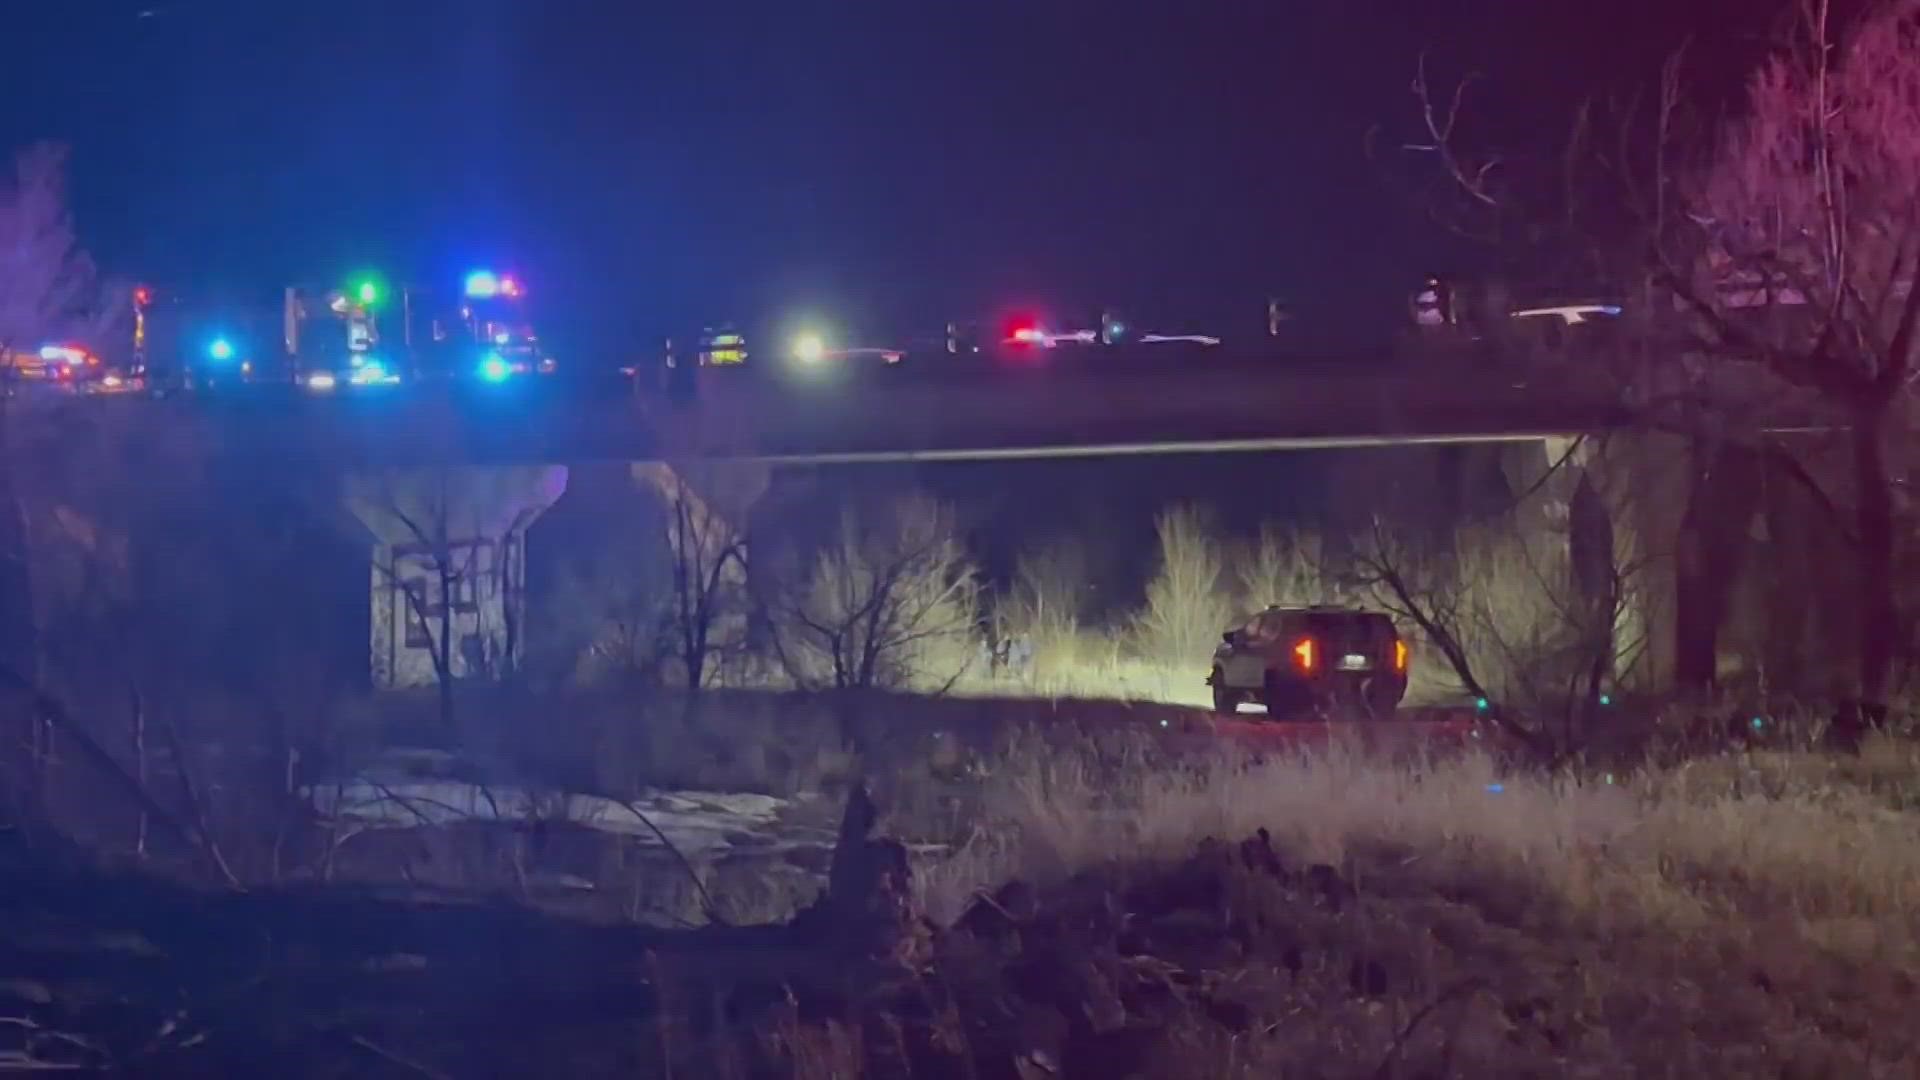 Police said the officer fell off a bridge while chasing a suspect Thursday night.